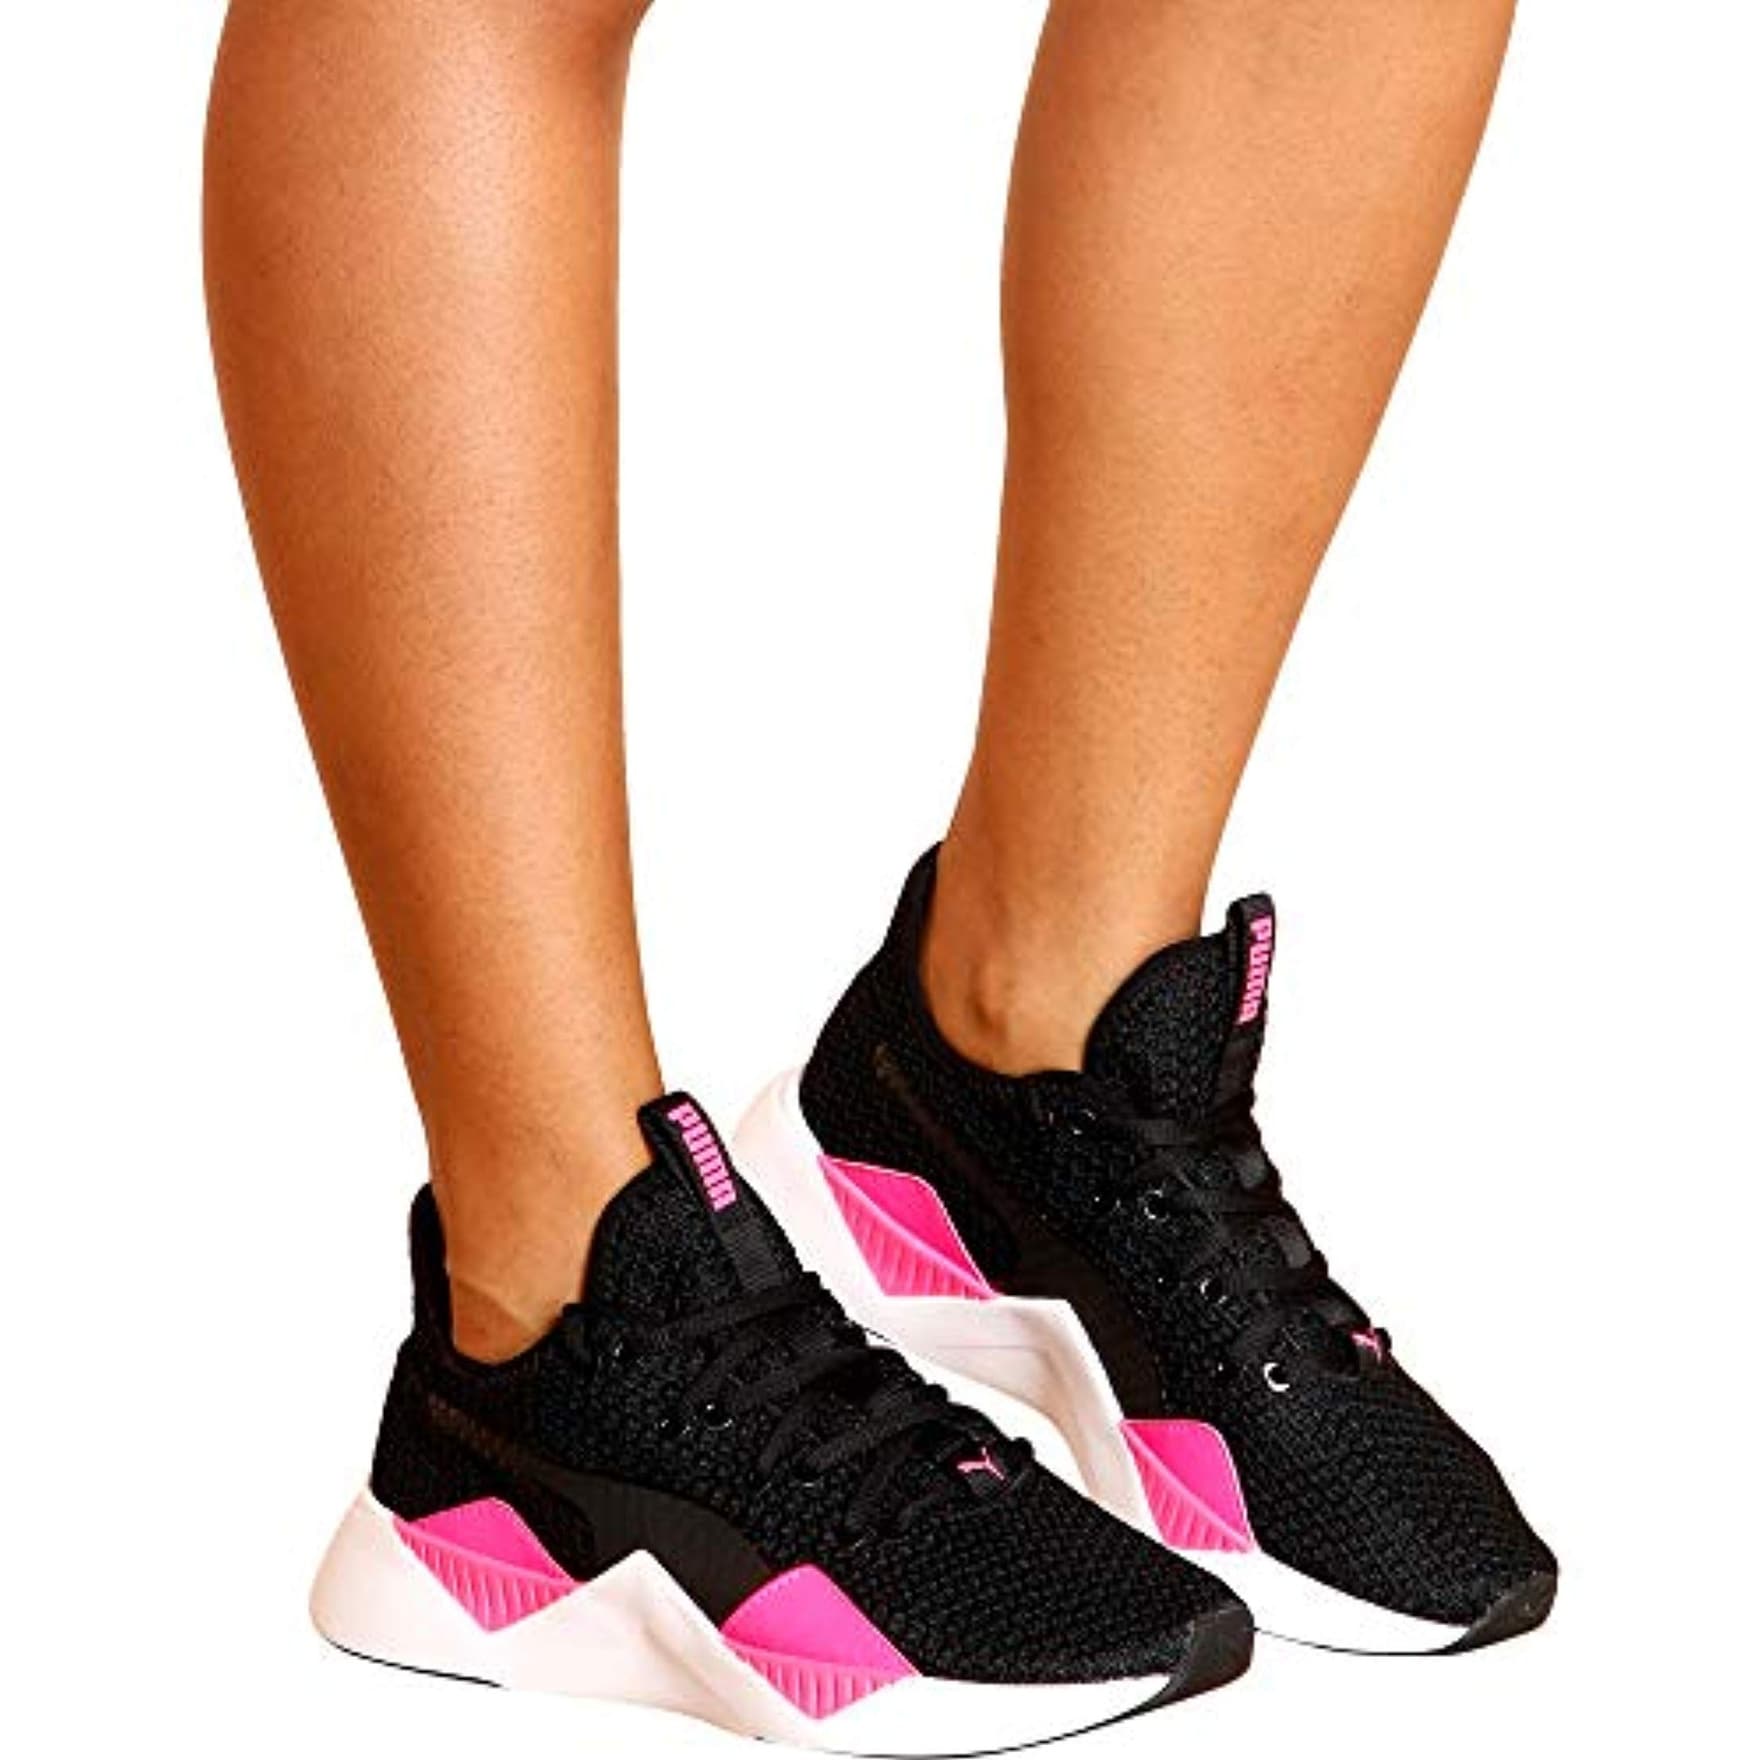 puma shoes black and pink